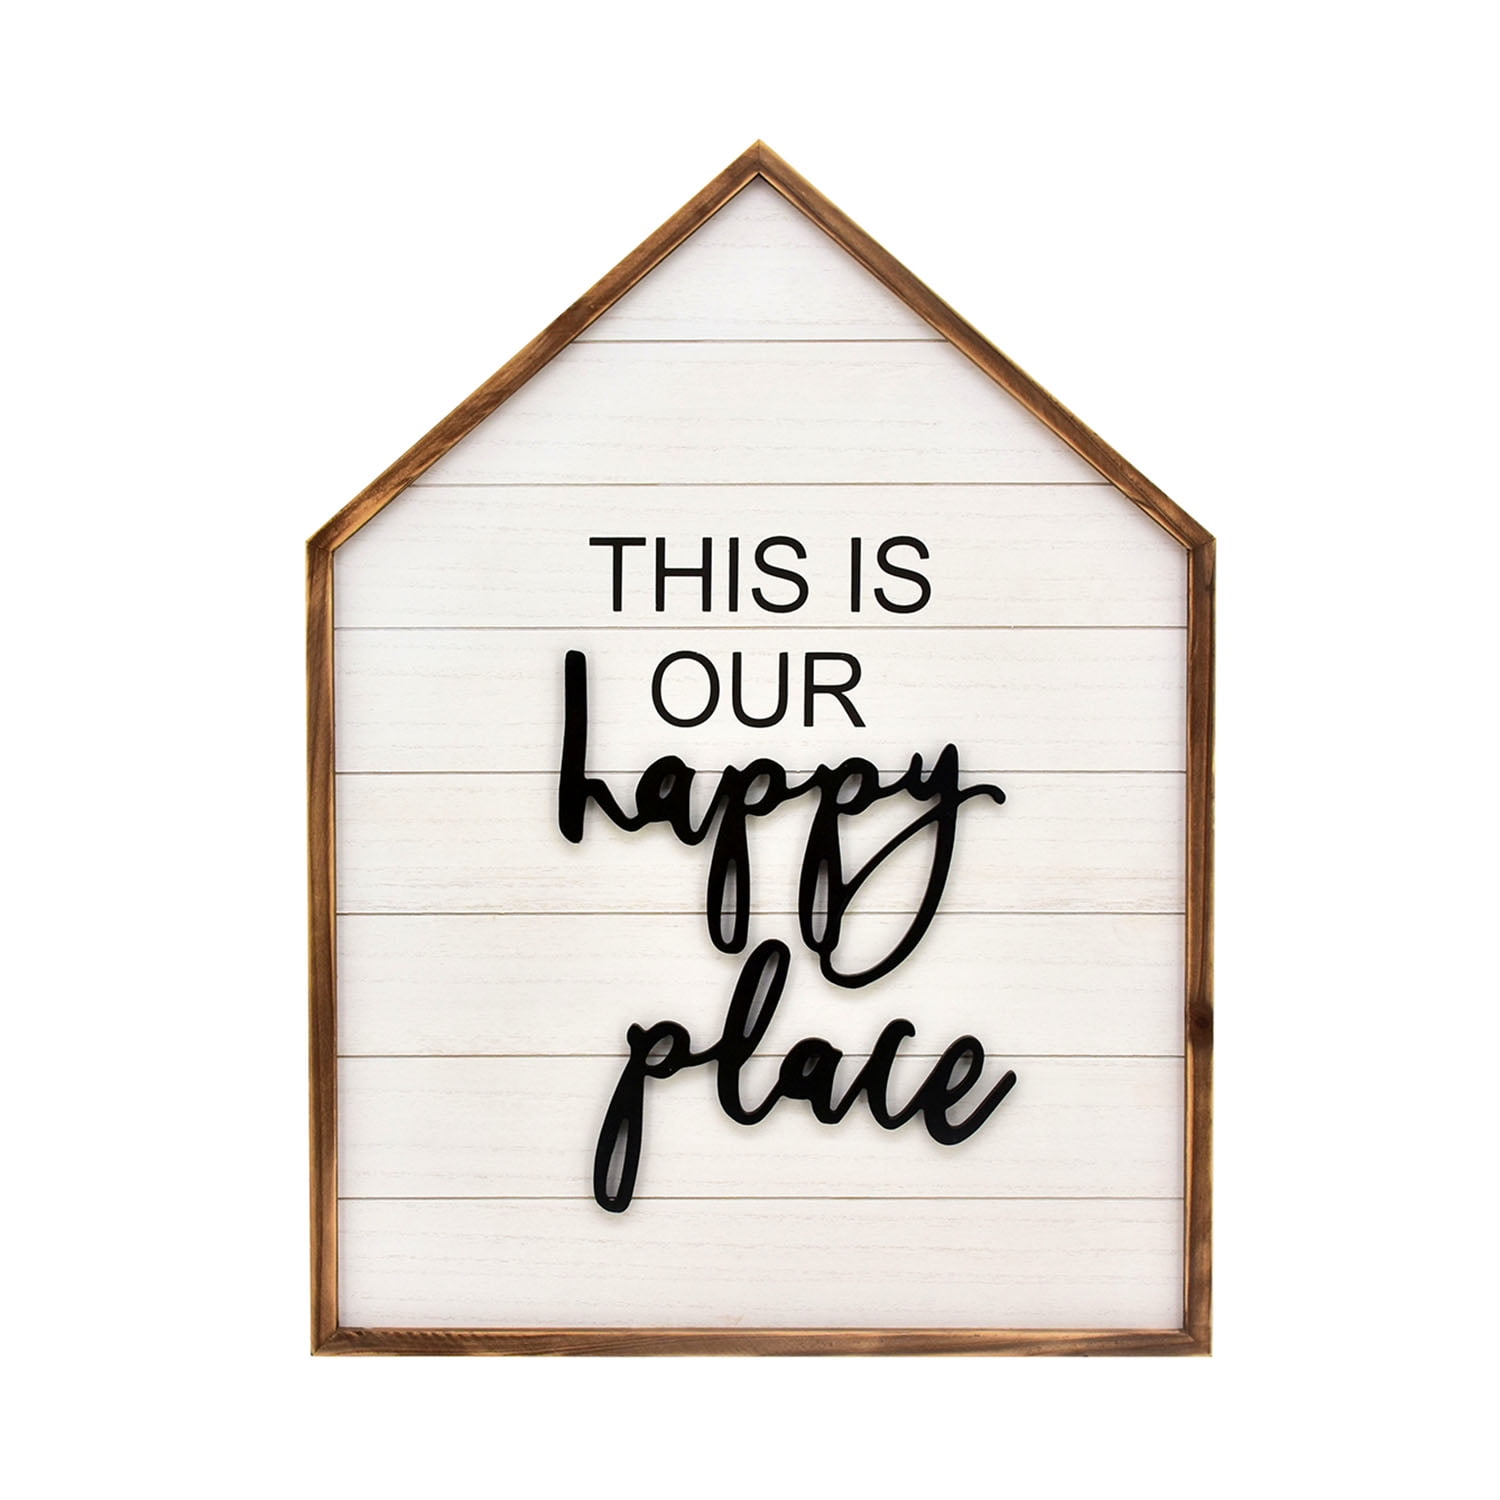 Parisloft Bless This Nest with Wood Beads Modern Wood Block Sign Tabletop Decor 